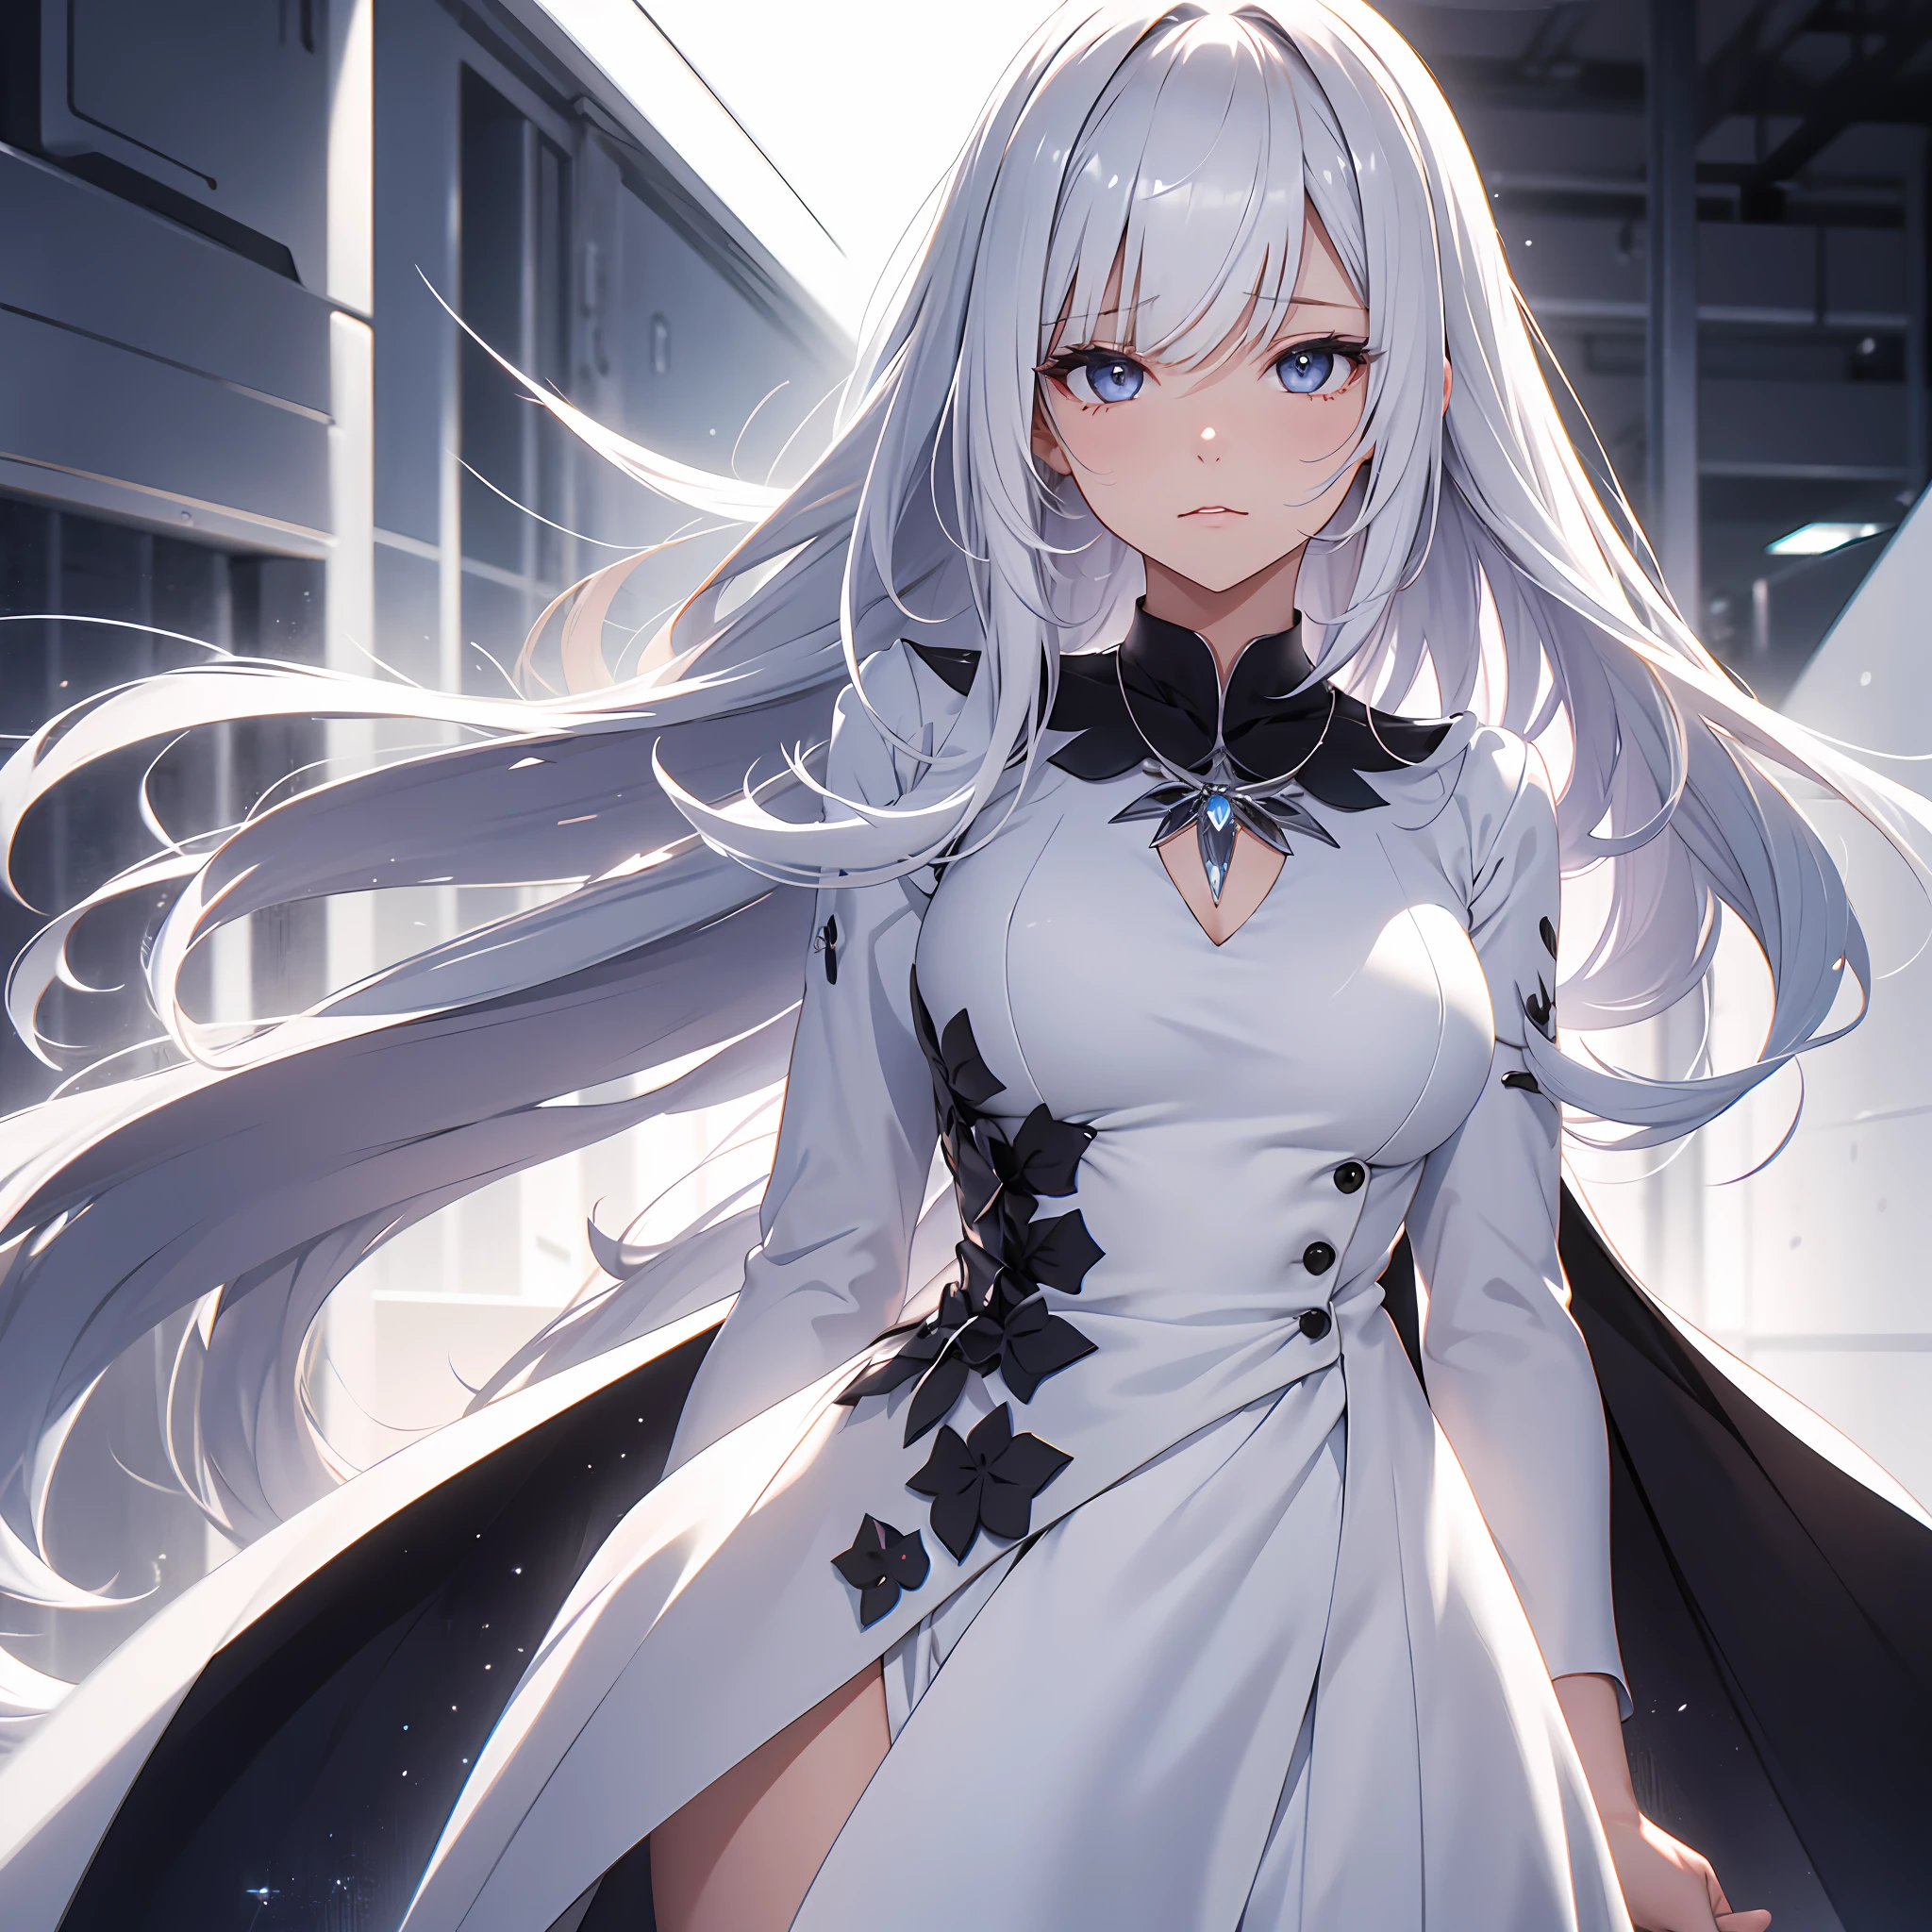 Cute adult girl standing, girl focus, (Full body close-up), ((Plain white background)), pokerface, upright immovable, (1girl in:1.3), Bangs, a necklace, facing front, （white suits), Crystal silver Eyes, slender, masterful technique, Long hair, animetic, Solo, Silk White hair, MastetPiece, ultra detail, [wide-hips], Beautiful Girl, (Detail Face), detail hands, ultra detail eyes, nothing face emotion, Beautiful eyes, mole under eye, oral invitation, curly hair, parted bangs, hair behind ear, medium hair, symmetry, Super Detail, High quality, 8k